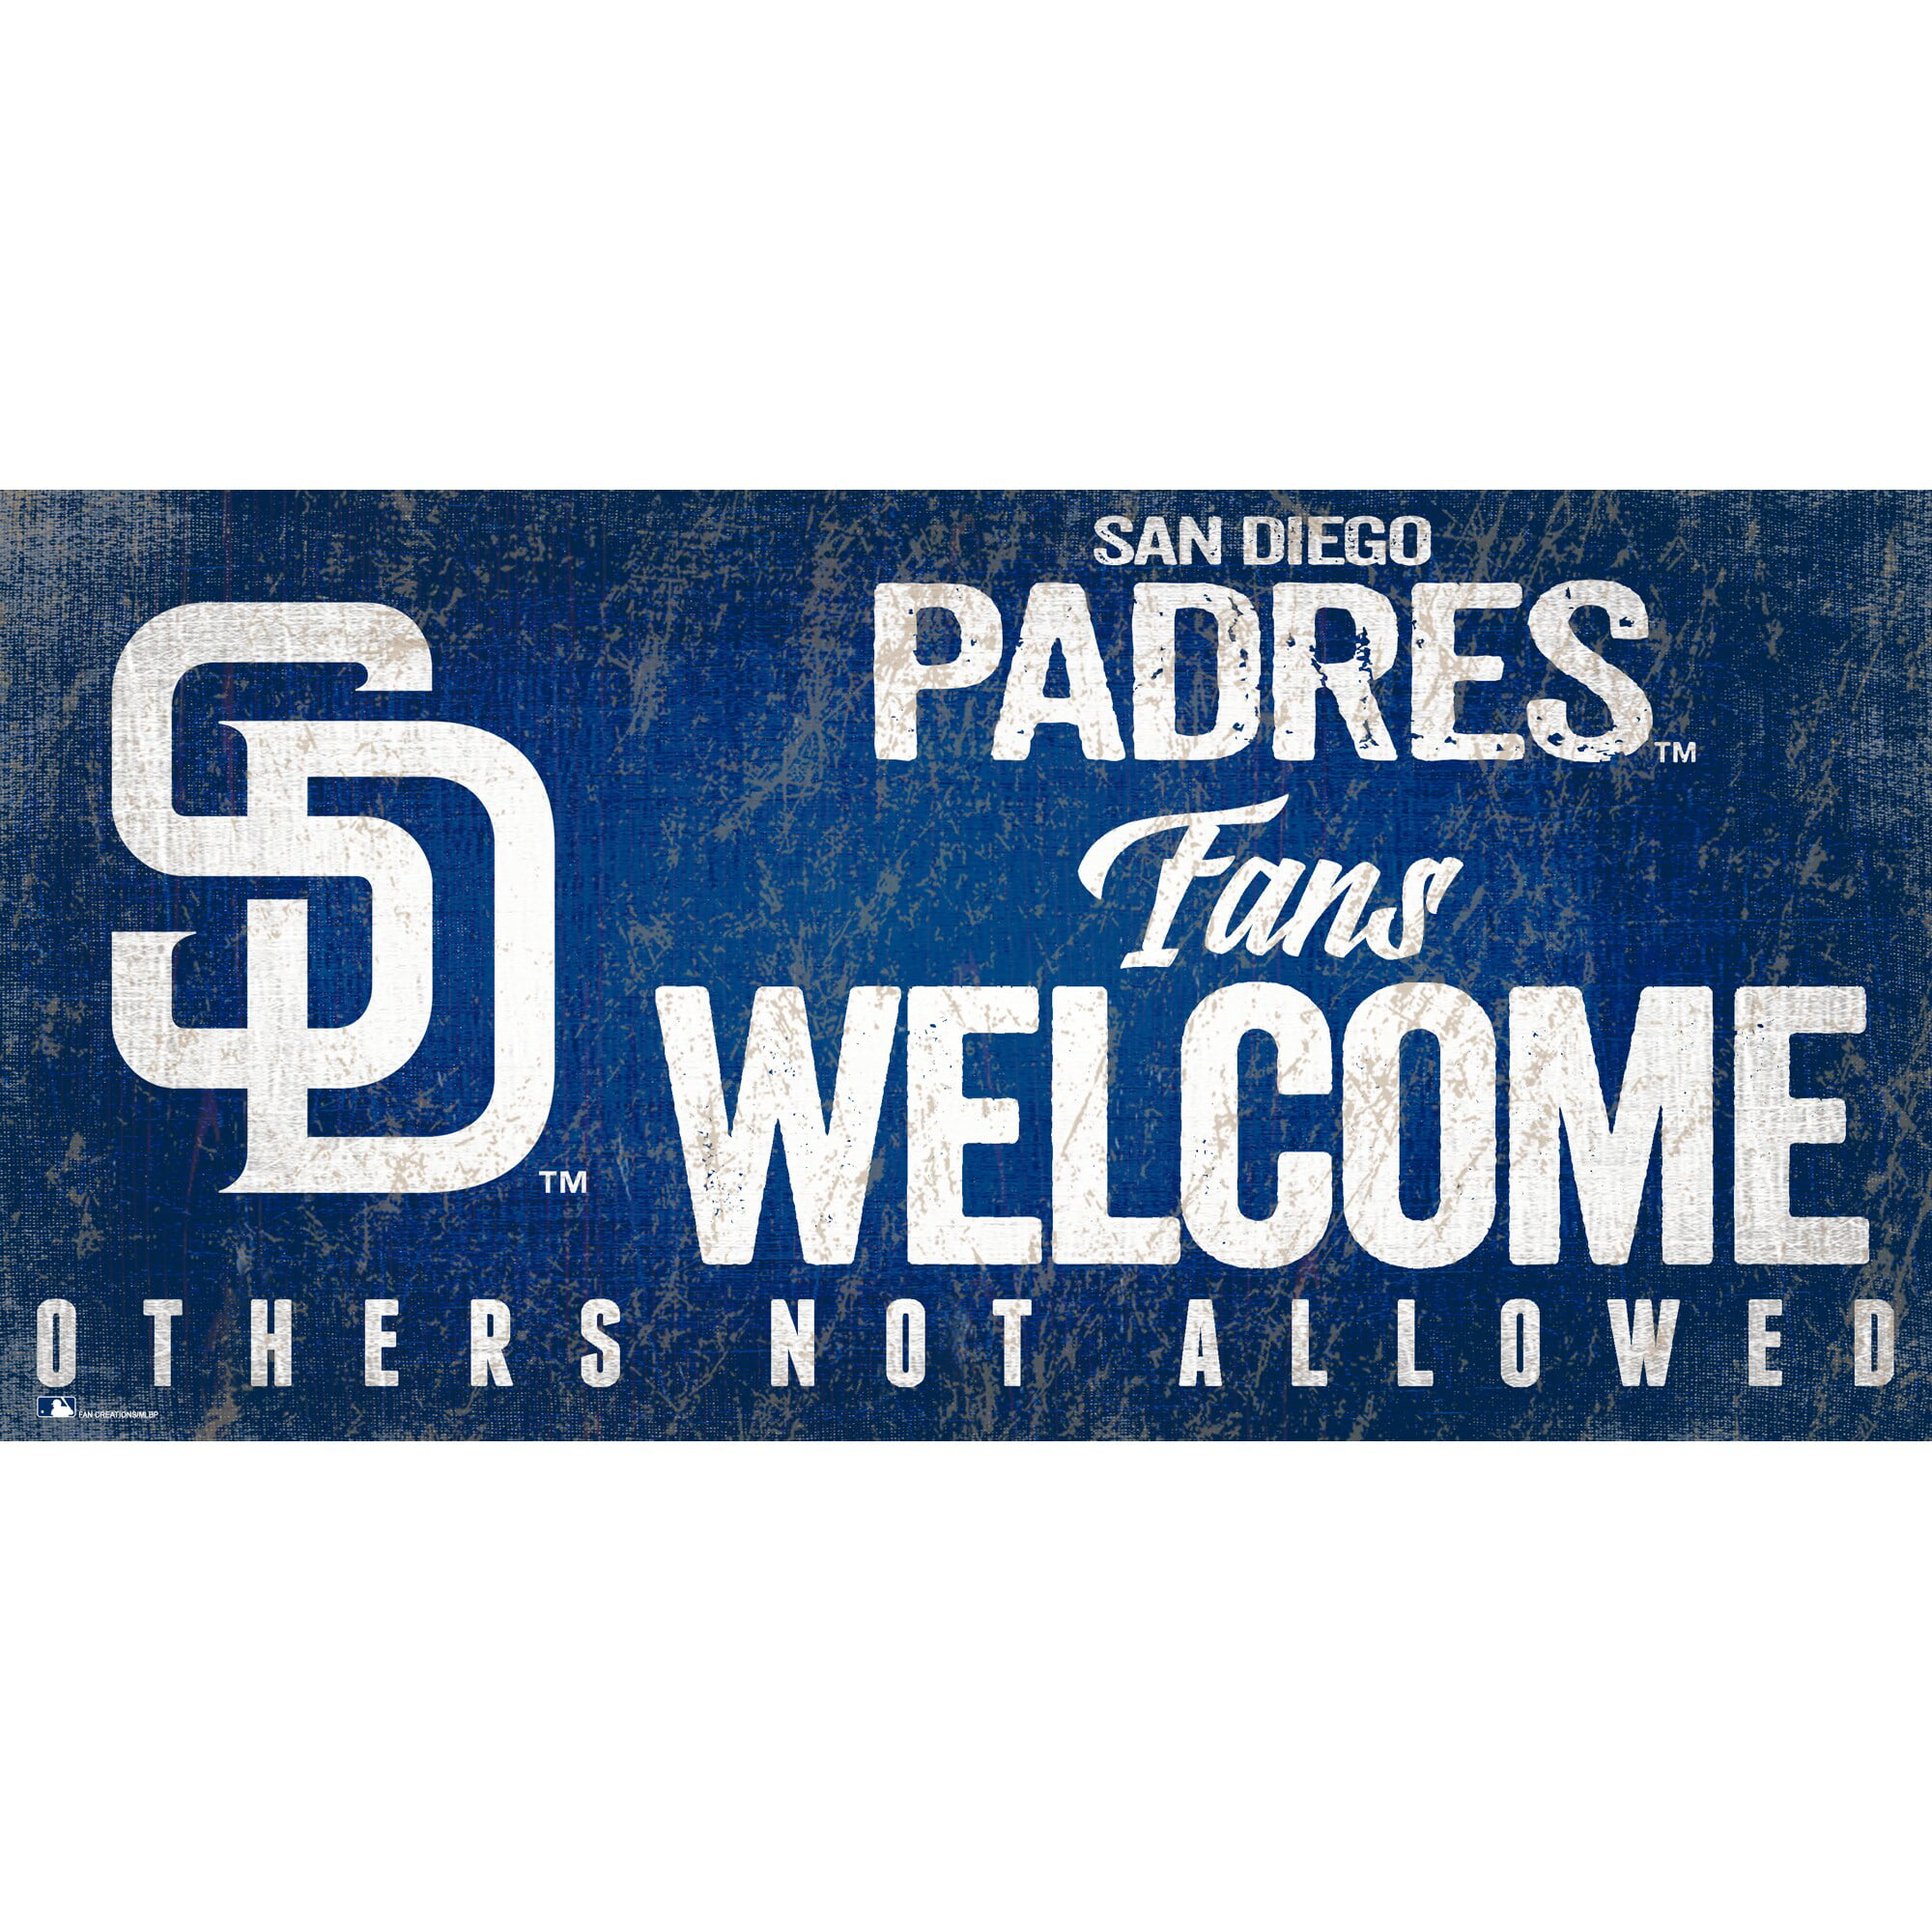 San Diego Padres Tony Gwynn Fanatics Authentic 10.5 x 13 Hall of Fame  Sublimated Plaque